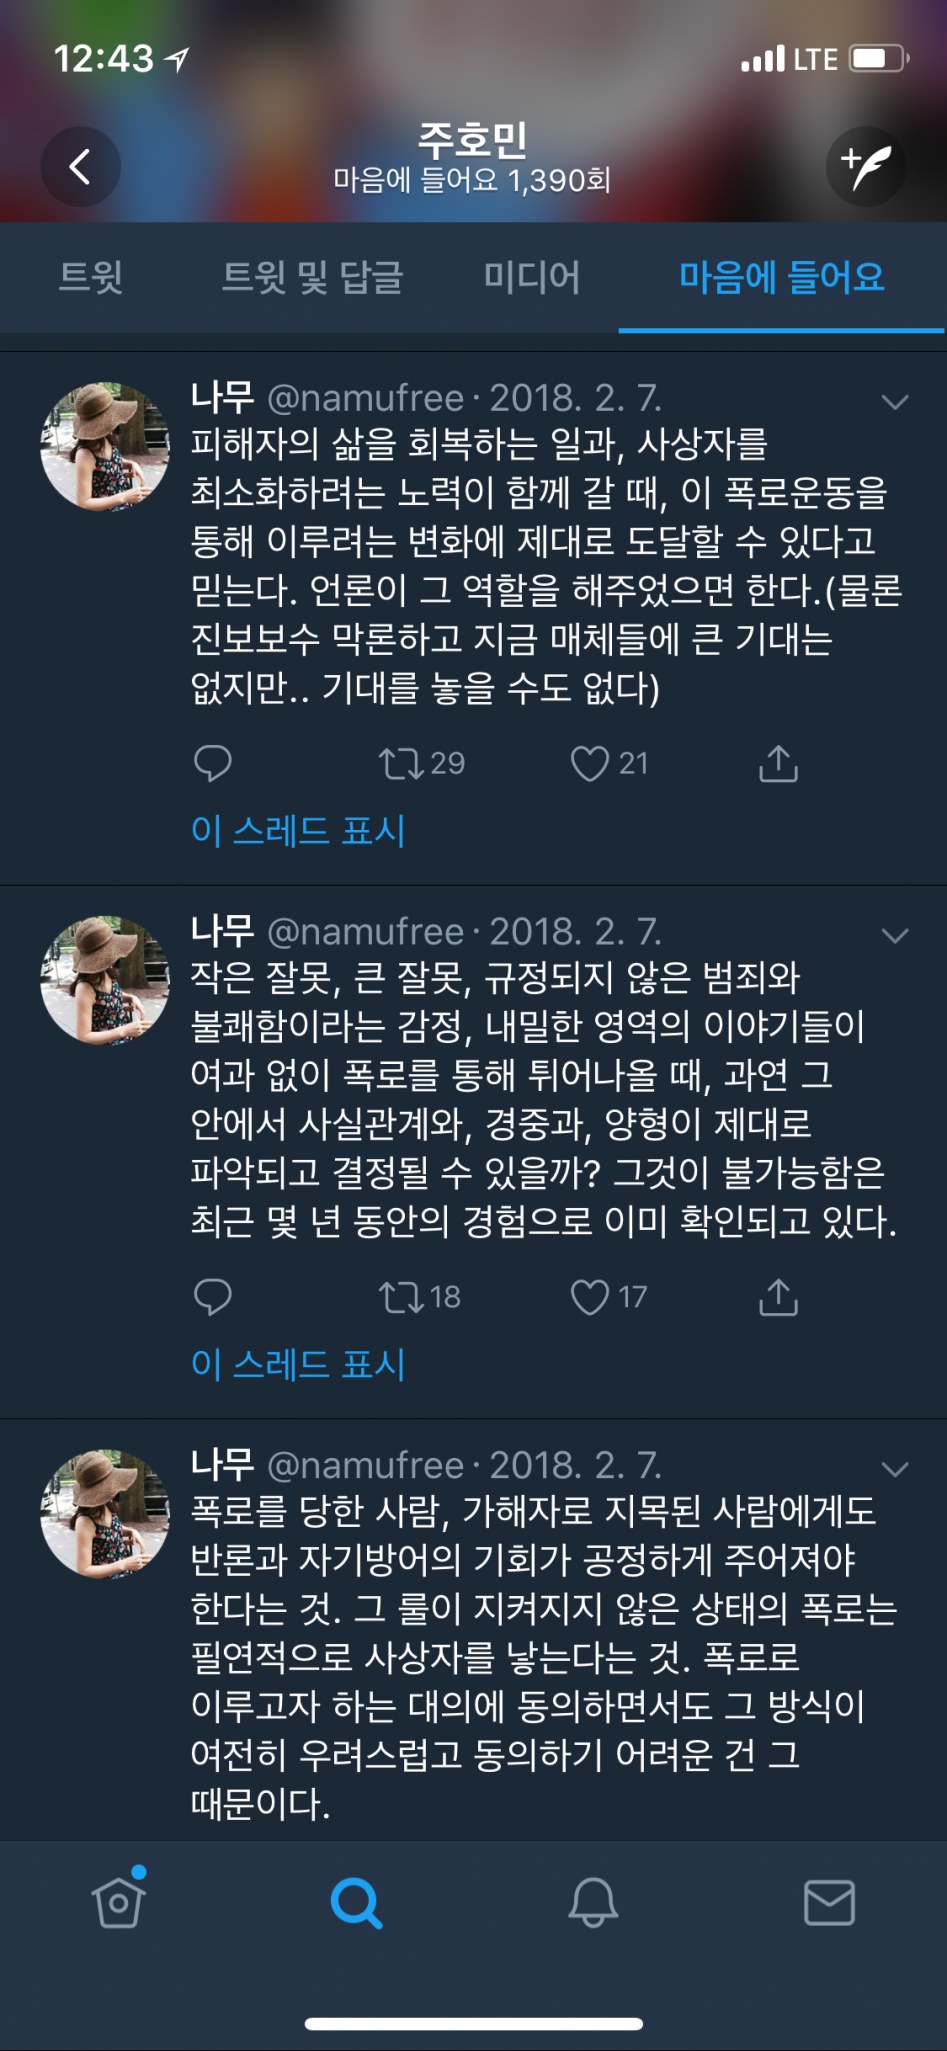 twitter-20180322-030946-001.png